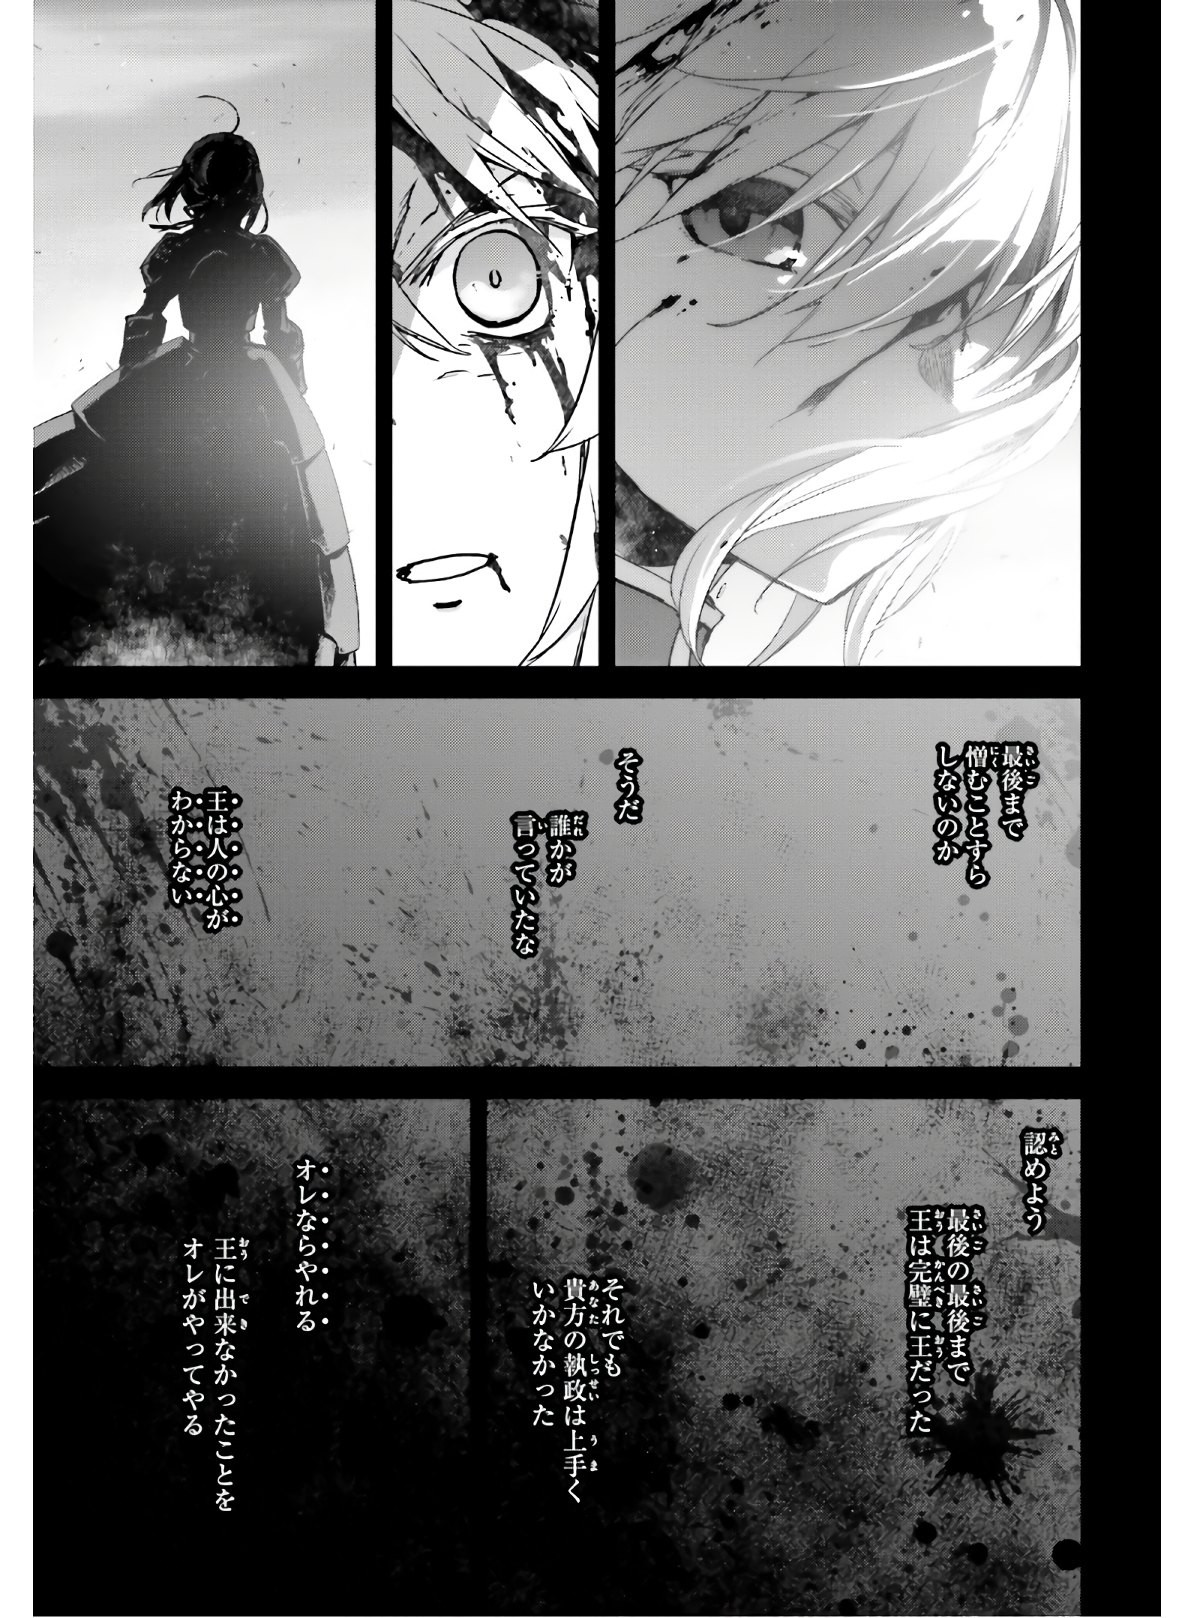 Fate-Apocrypha - Chapter 42 - Page 11